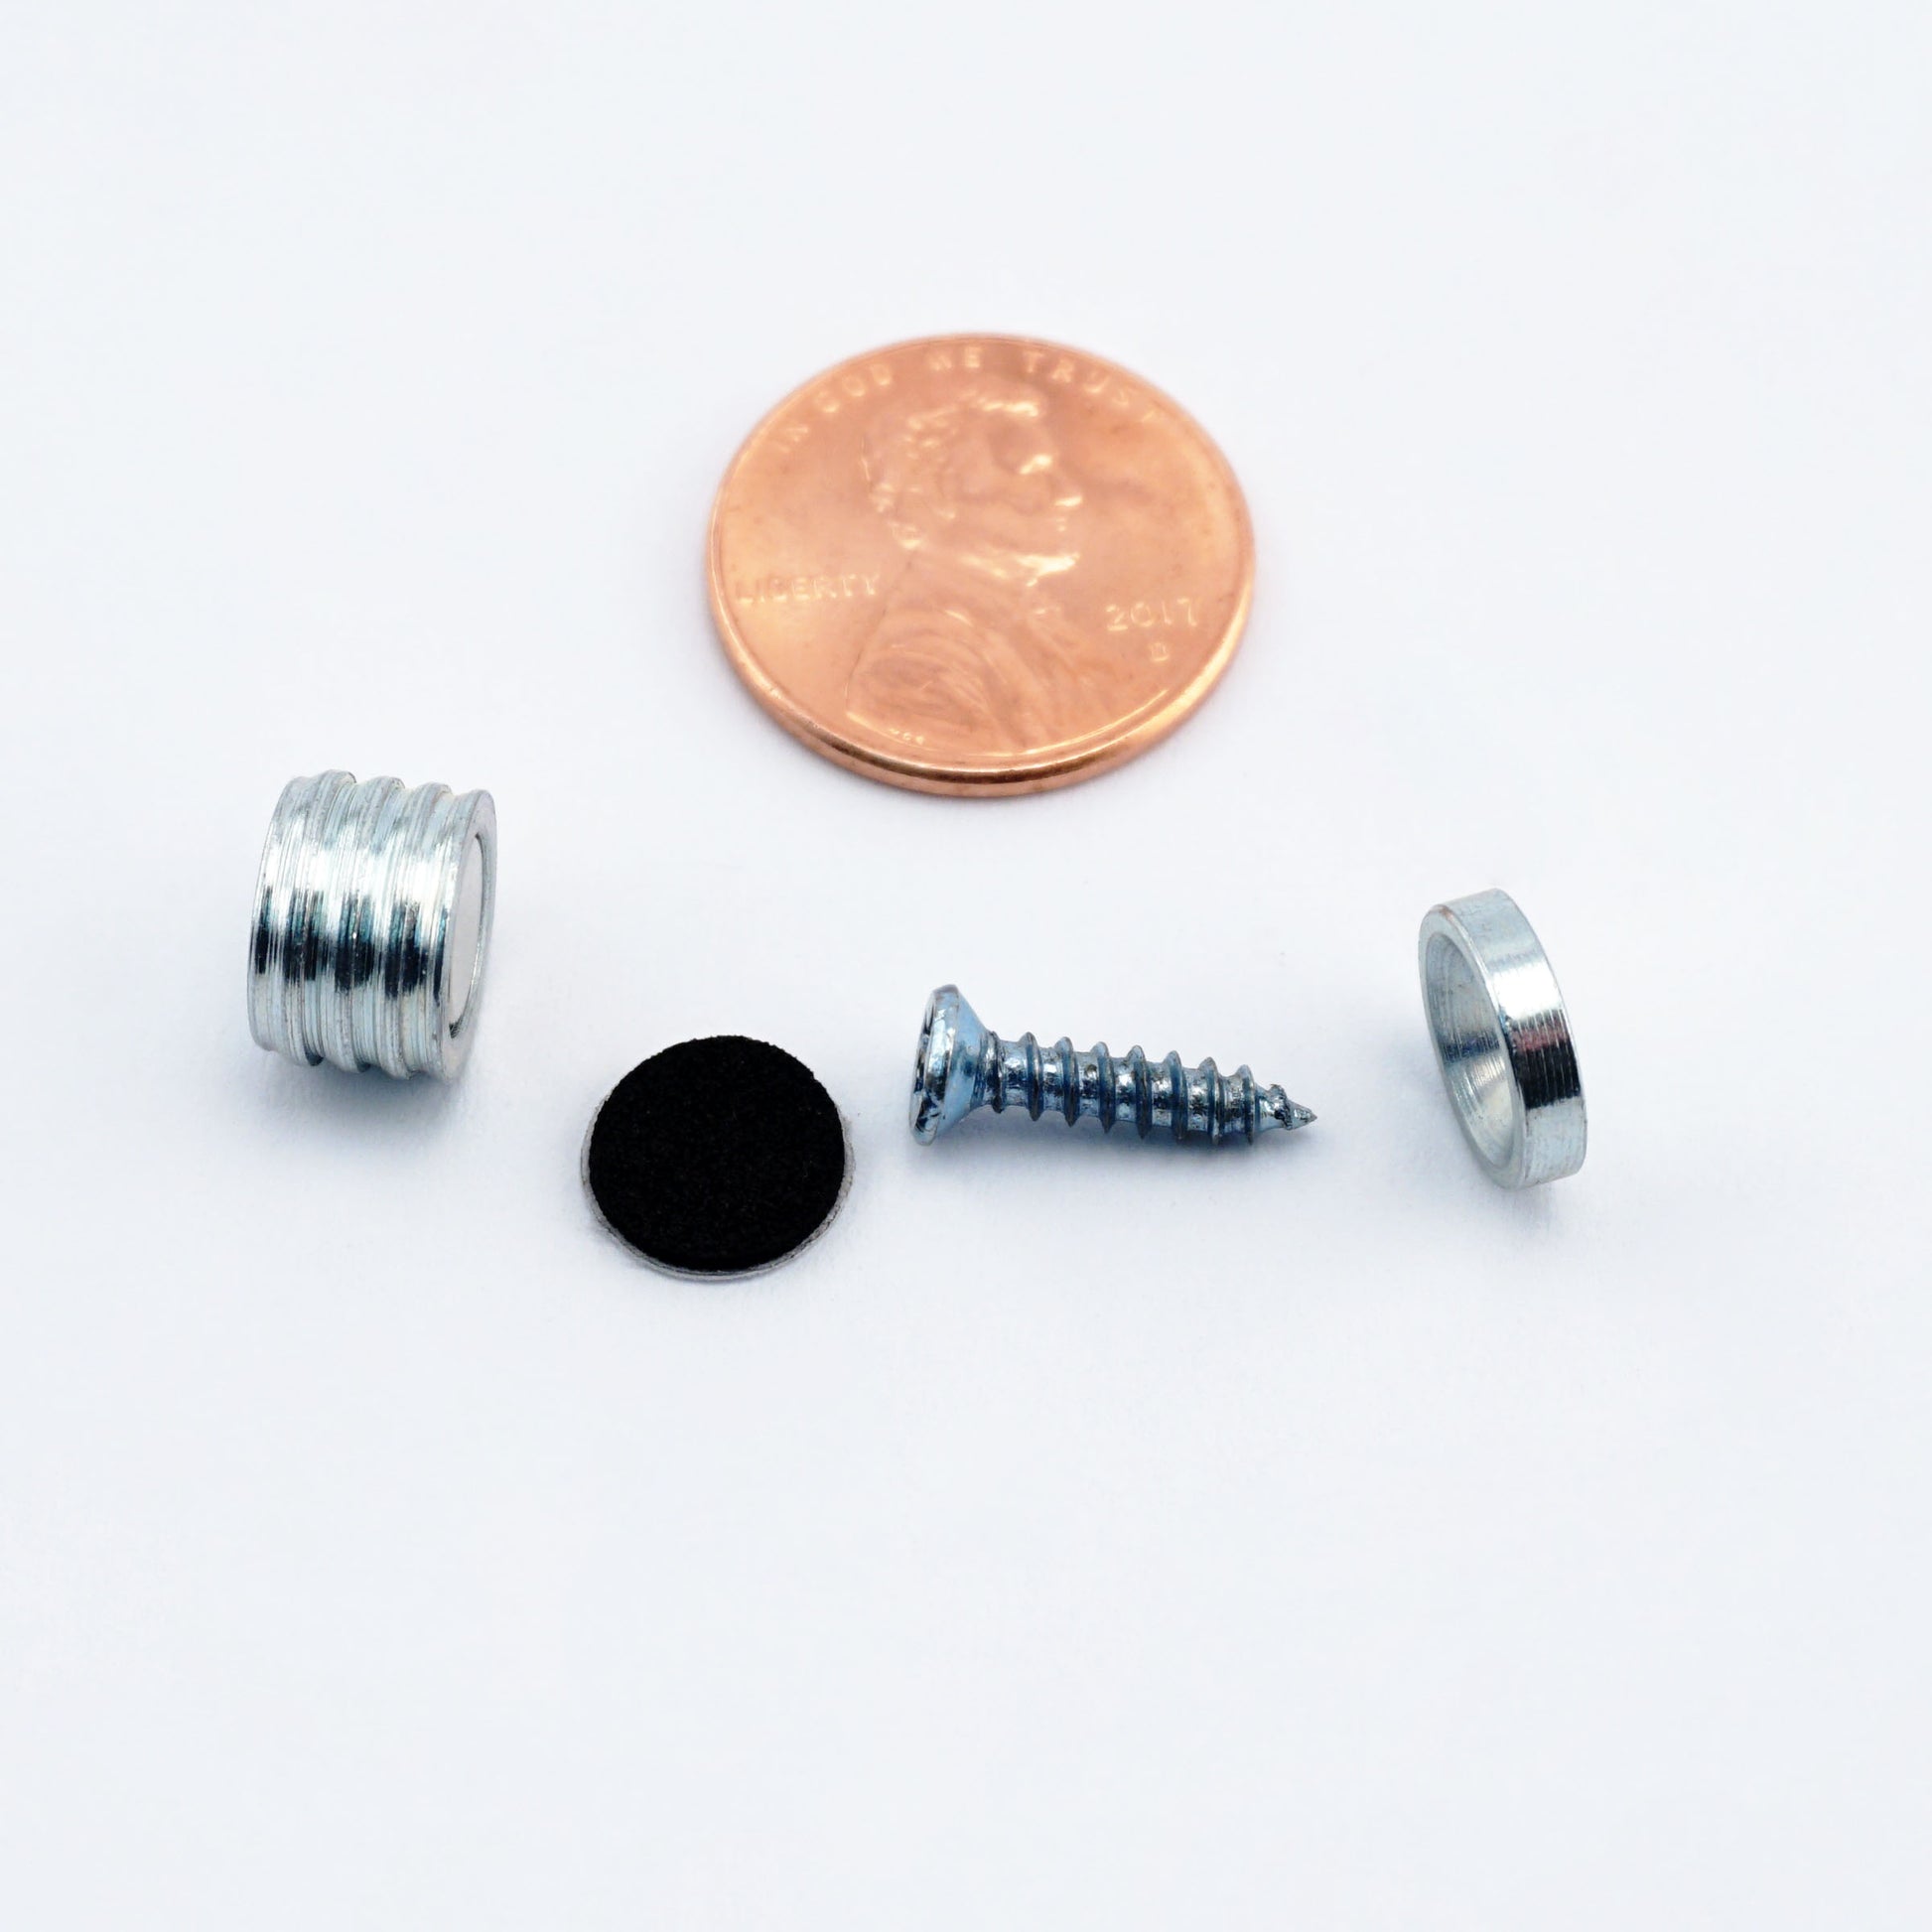 Load image into Gallery viewer, 07570 Neodymium Latch Magnet Kit (4 sets) - Components compared to penny for size reference